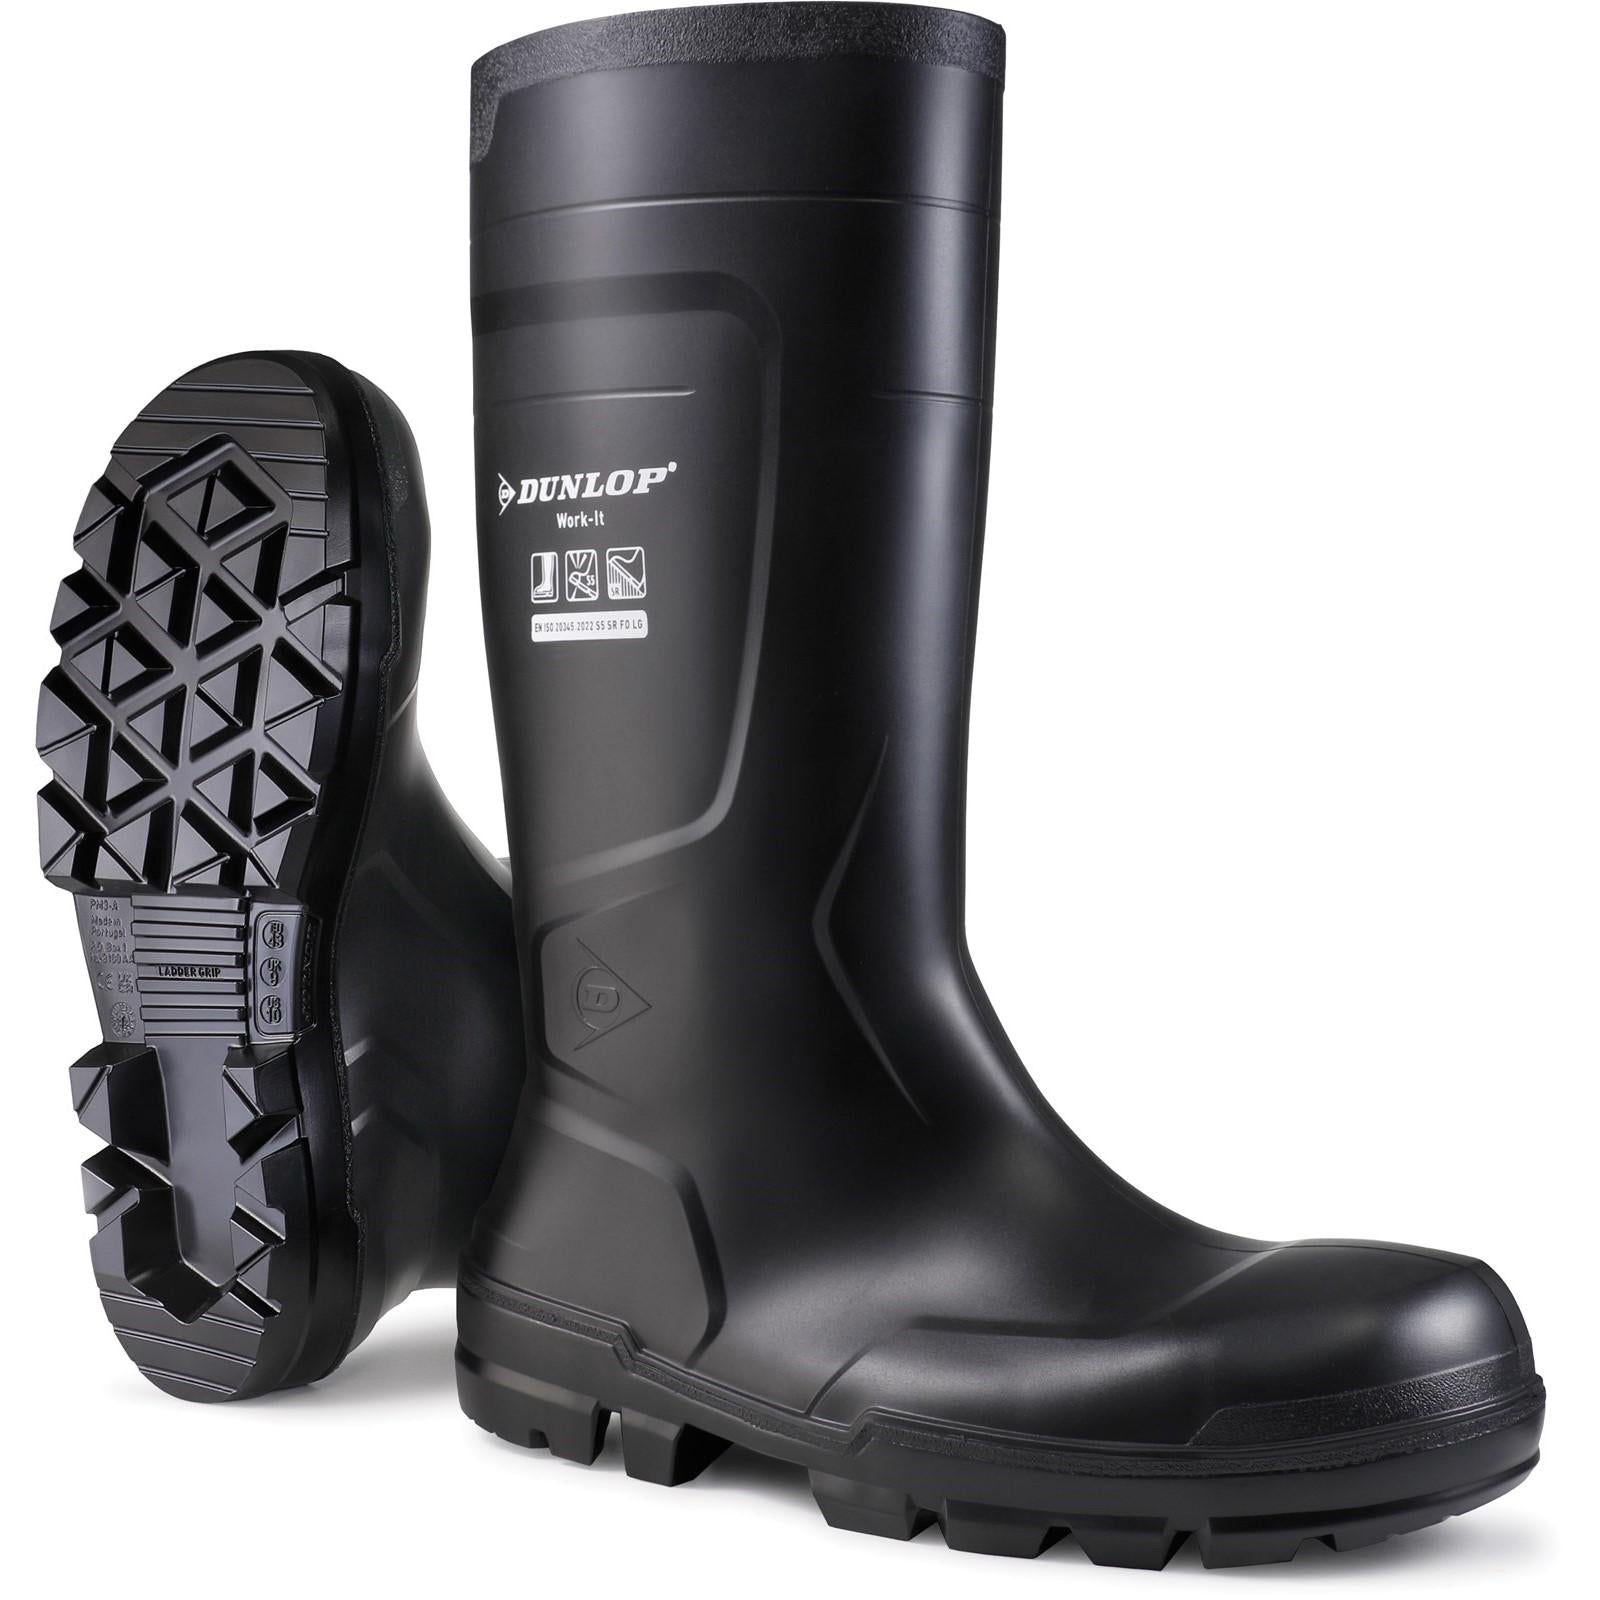 Dunlop Work-It Full Safety Wellington Boots